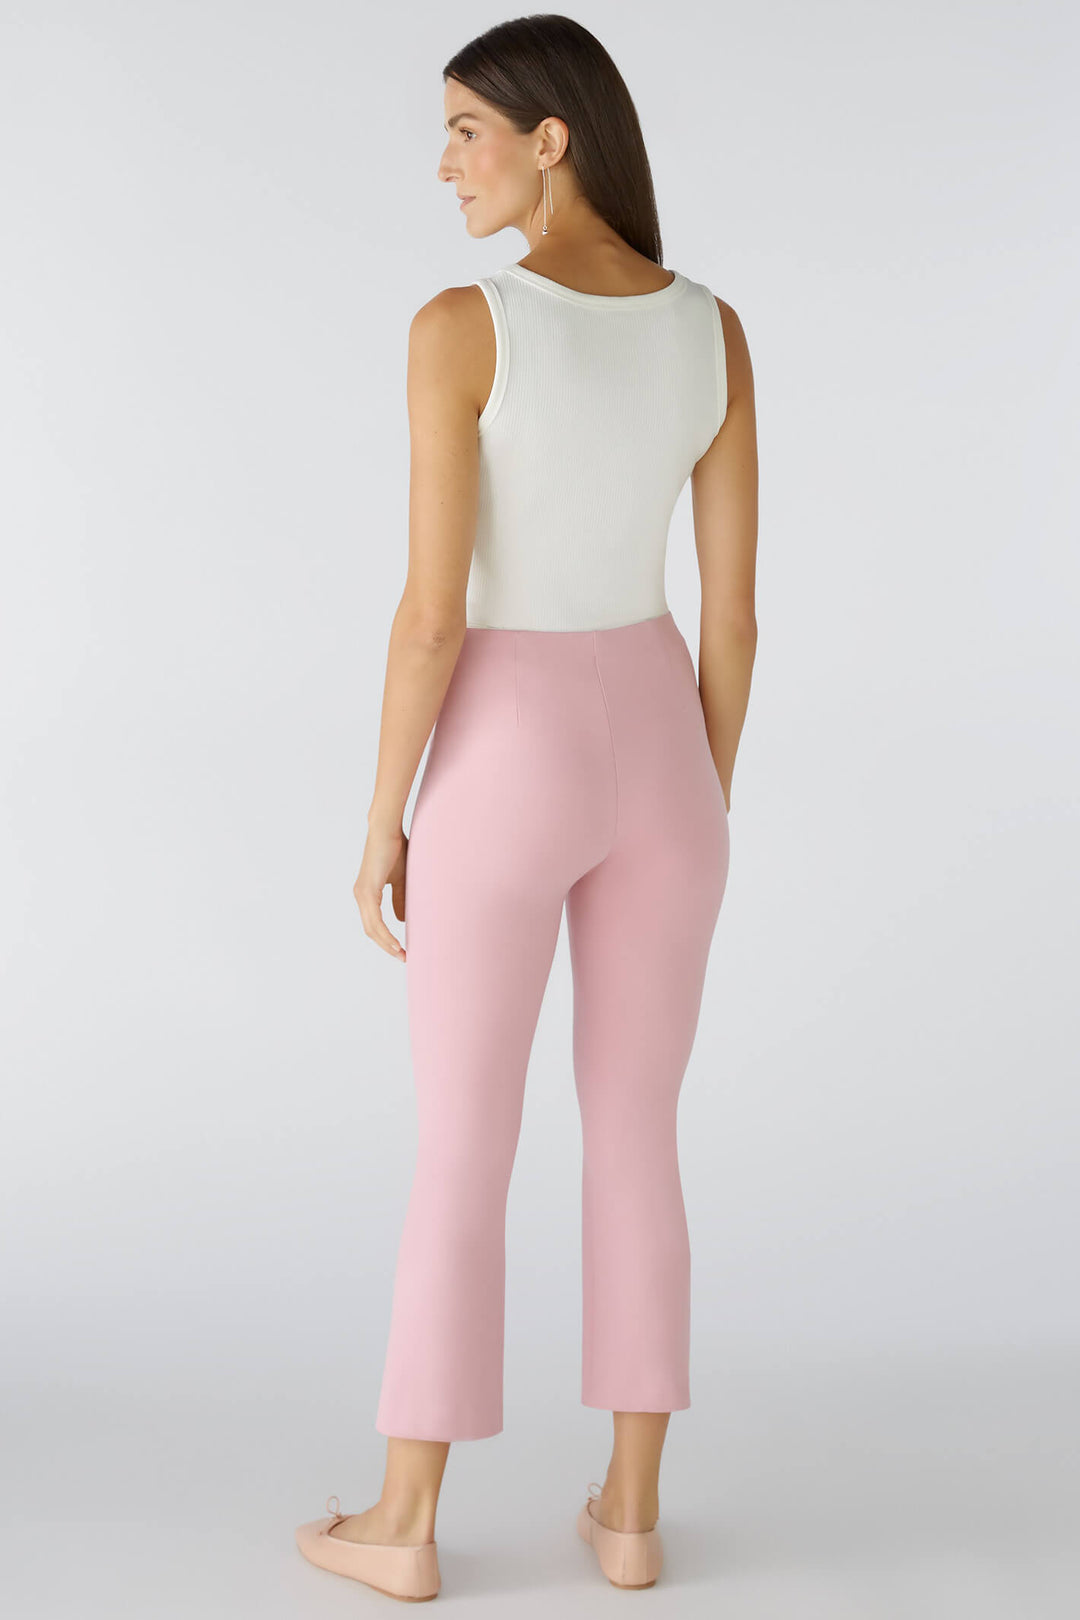 Oui 85724 Rose Pink Pull-On Cropped Trousers - Olivia Grace Fashion